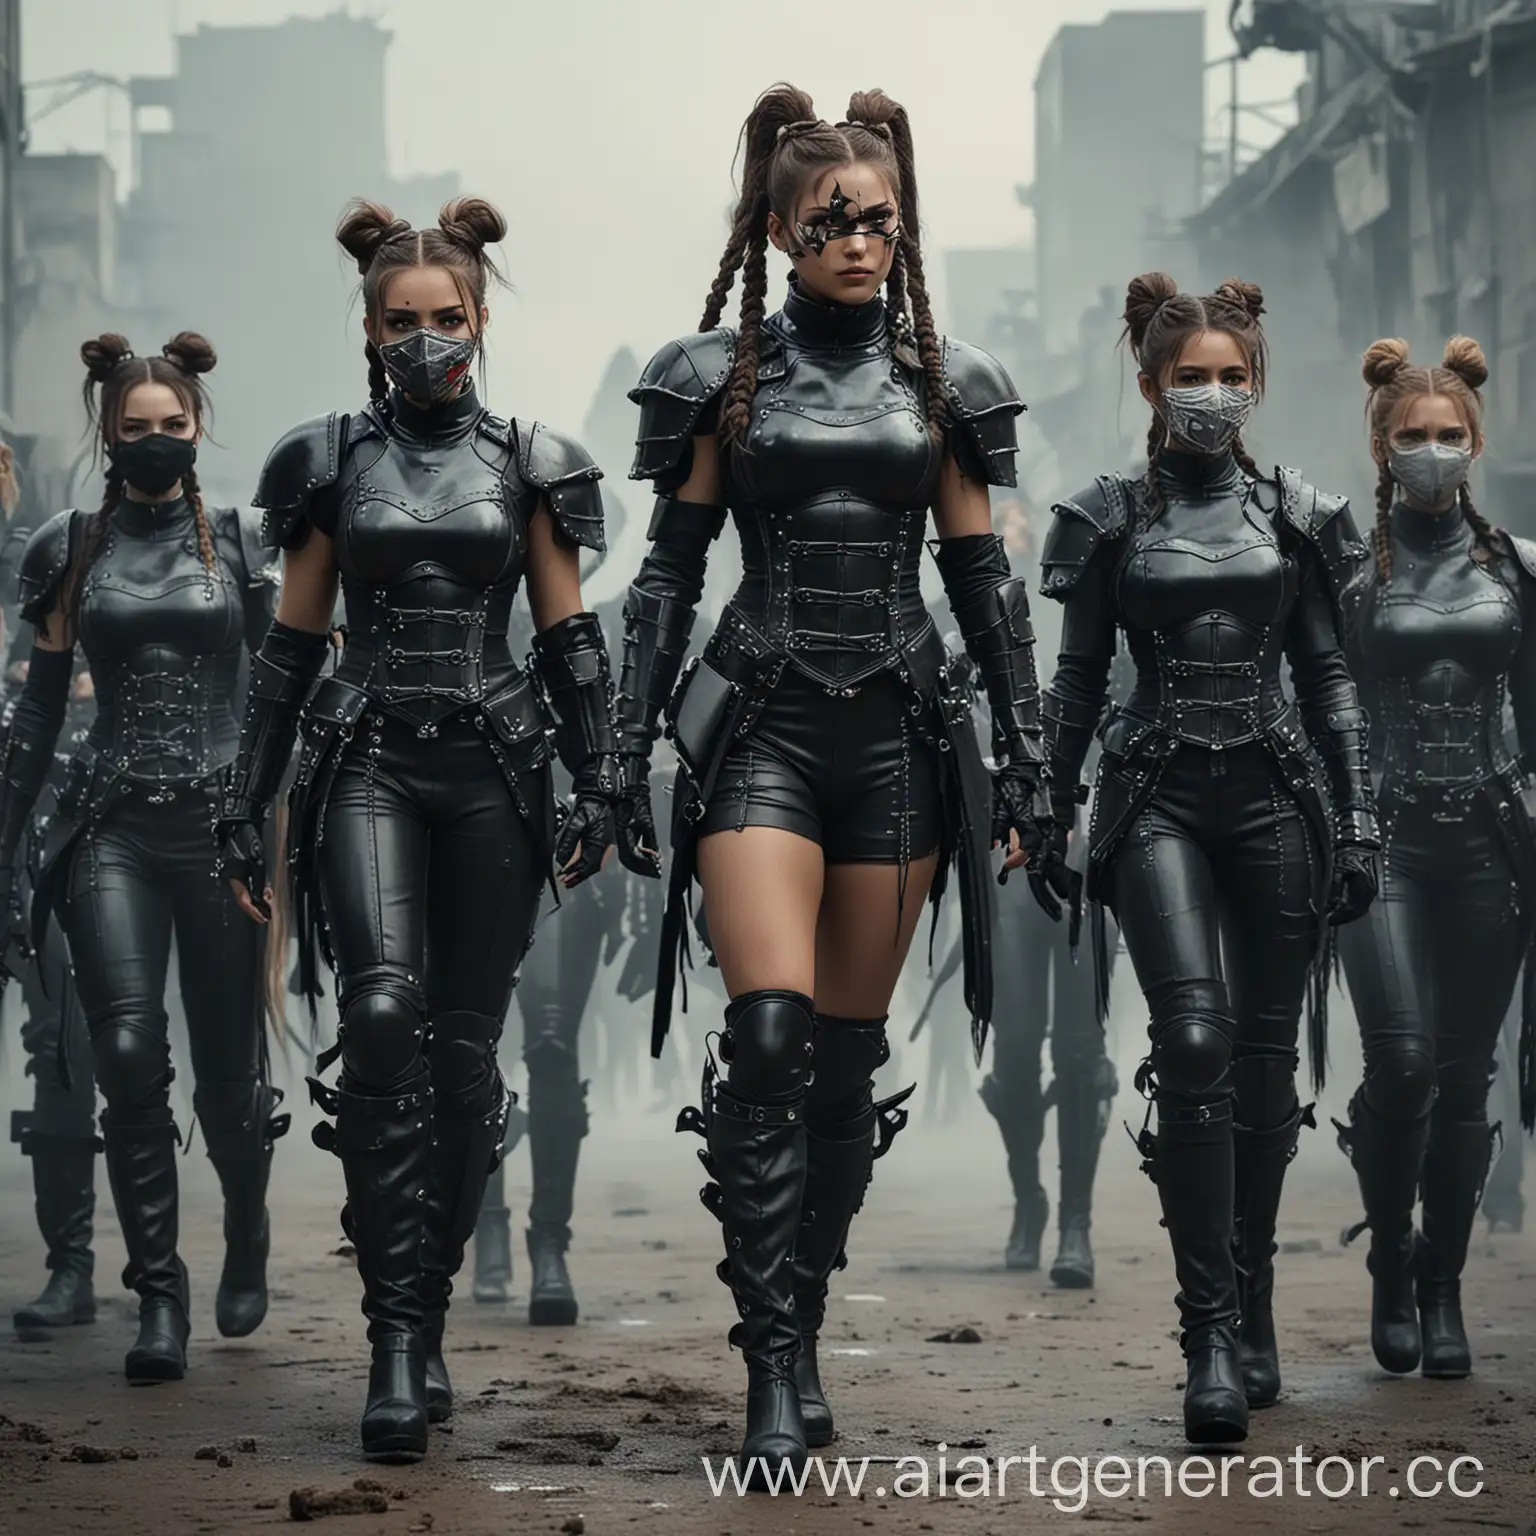 Female-Soldiers-in-Black-Armor-with-Masks-Stealthy-Warriors-Confronting-the-Enemy